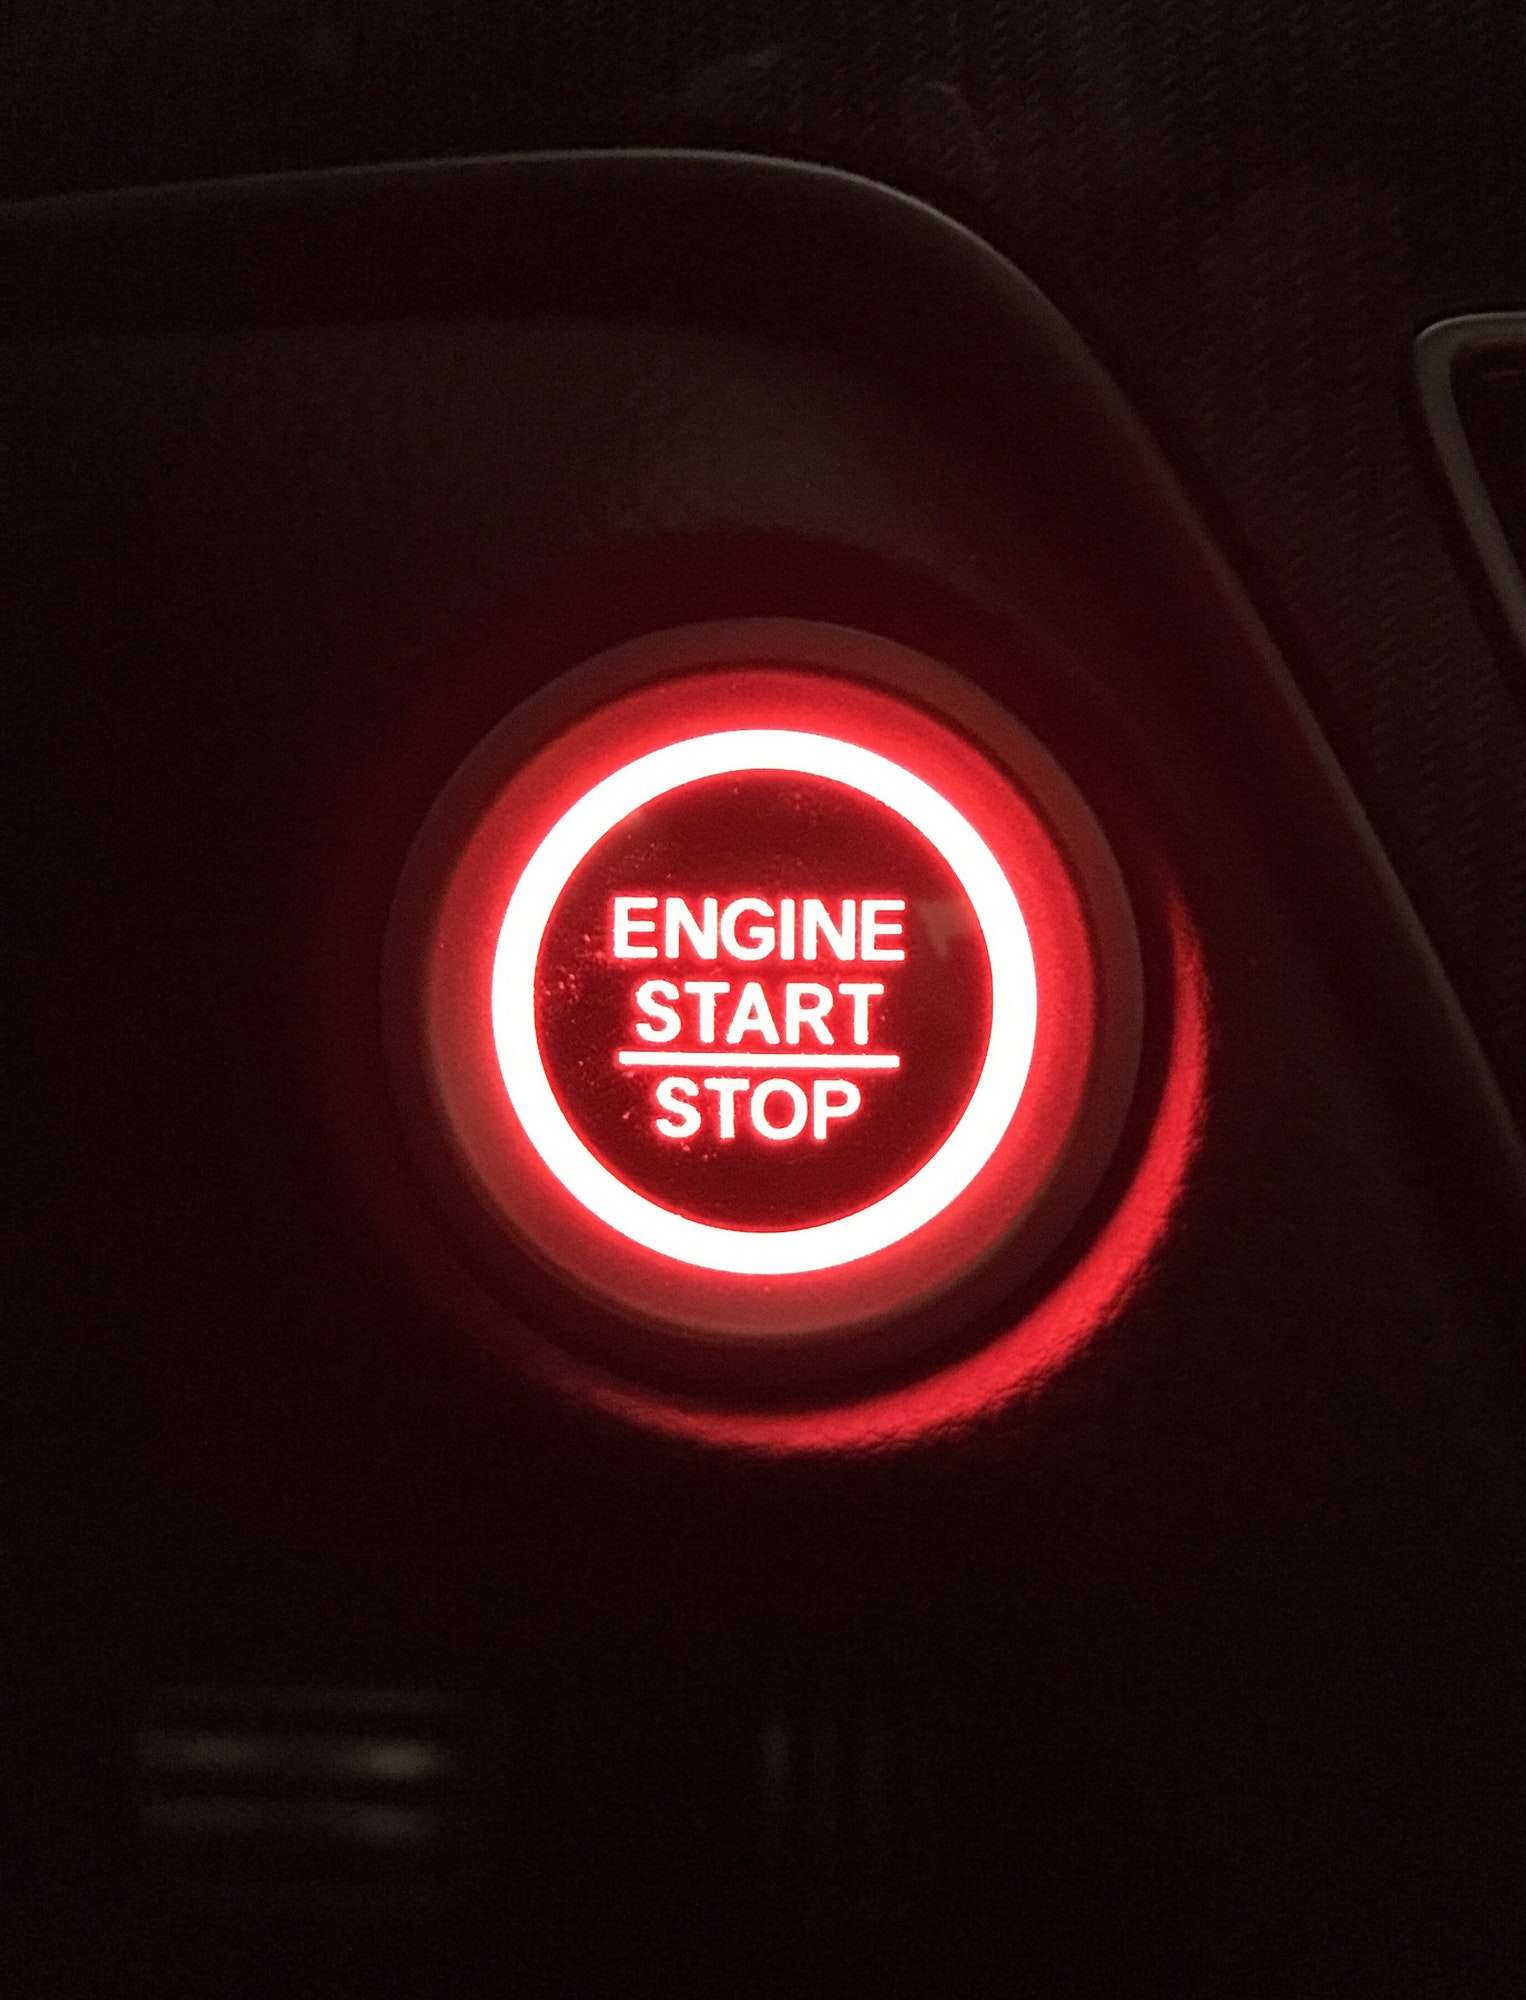 Modern automobile illuminated engine start stop ignition button in red